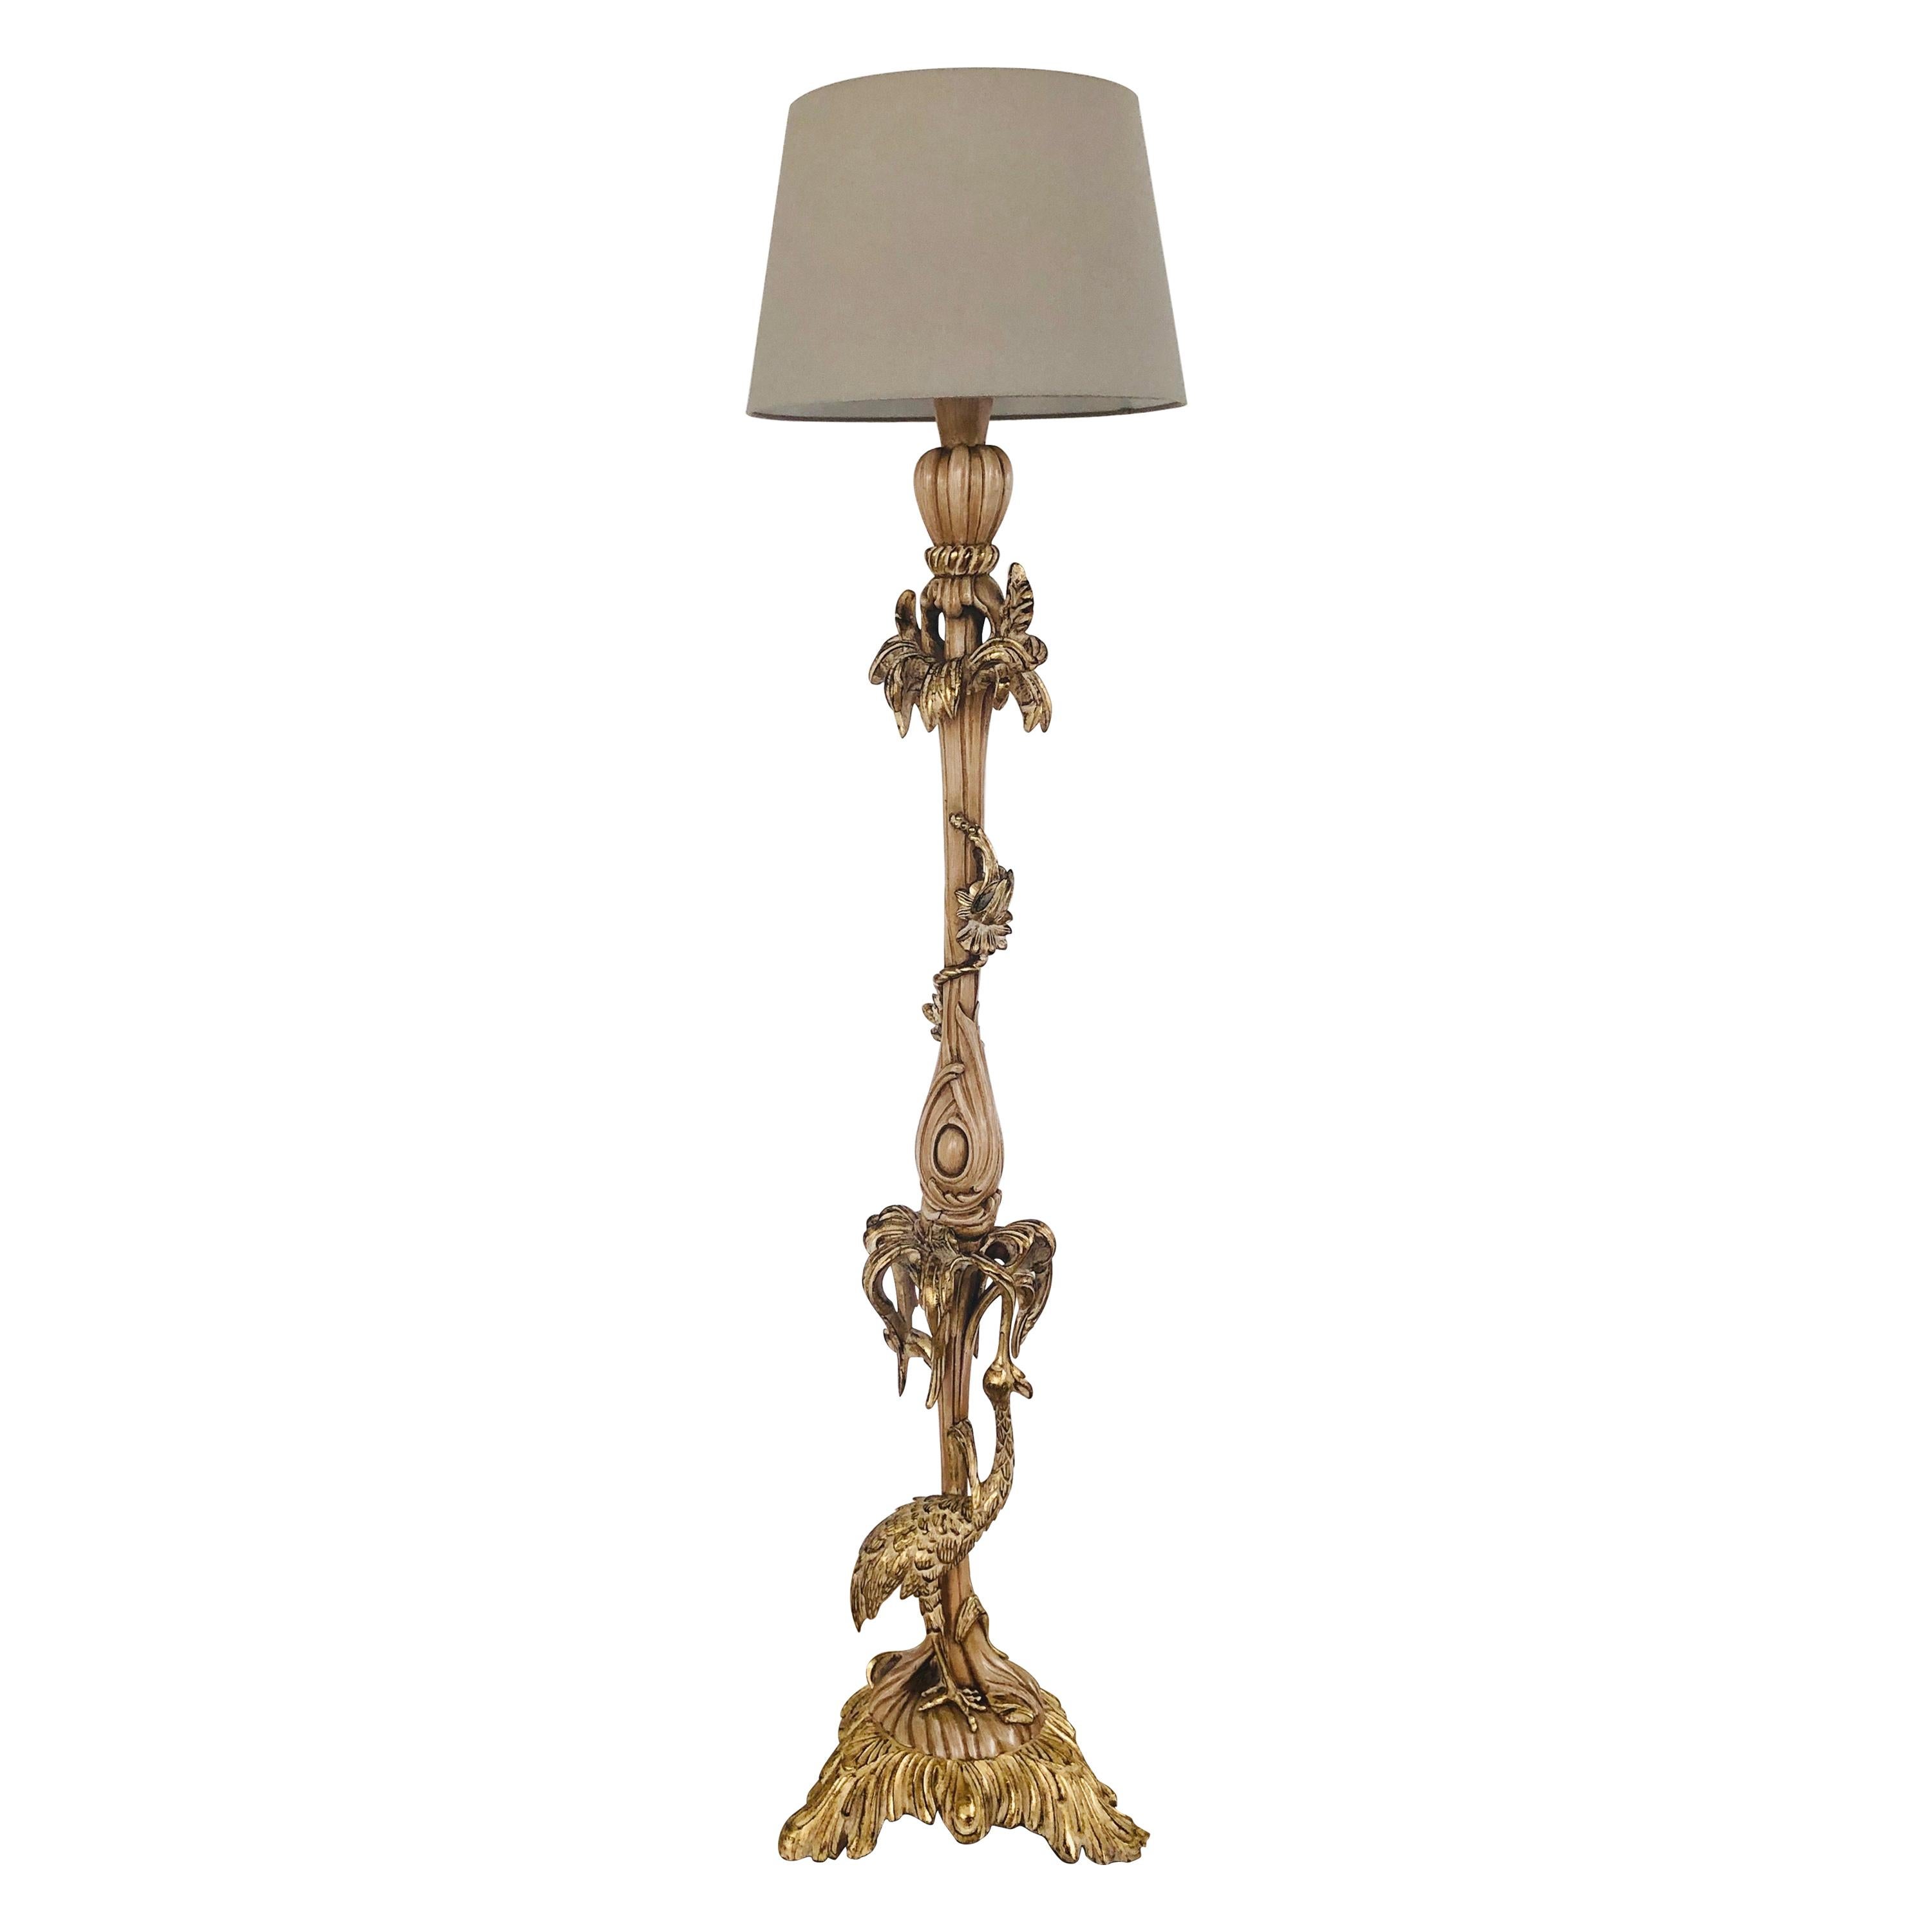 Italian Luxury Floor Lamp with Shade by Riva Mobili D'Arte